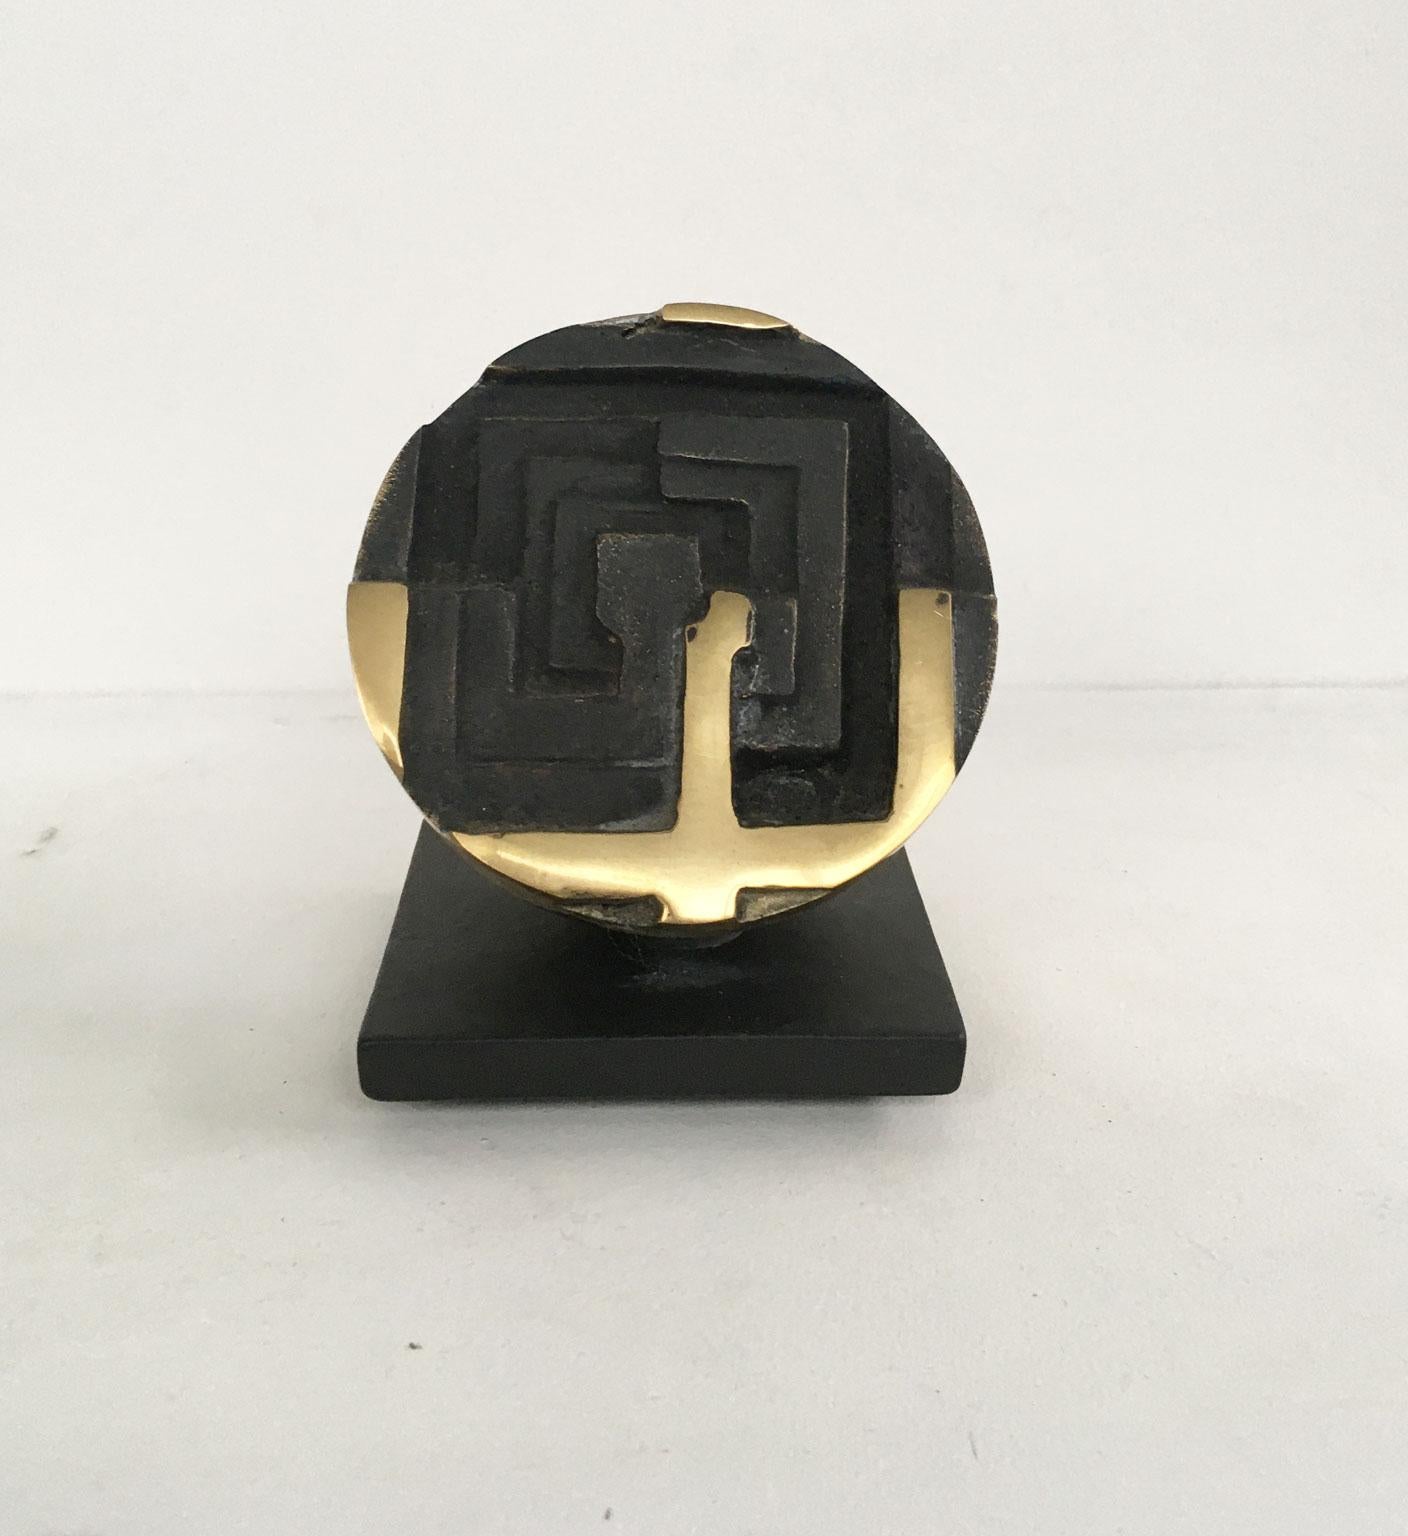 1978 Italy Bronze Abstract Sculpture by Fanna Roncoroni Labirinto Labyrinth For Sale 9